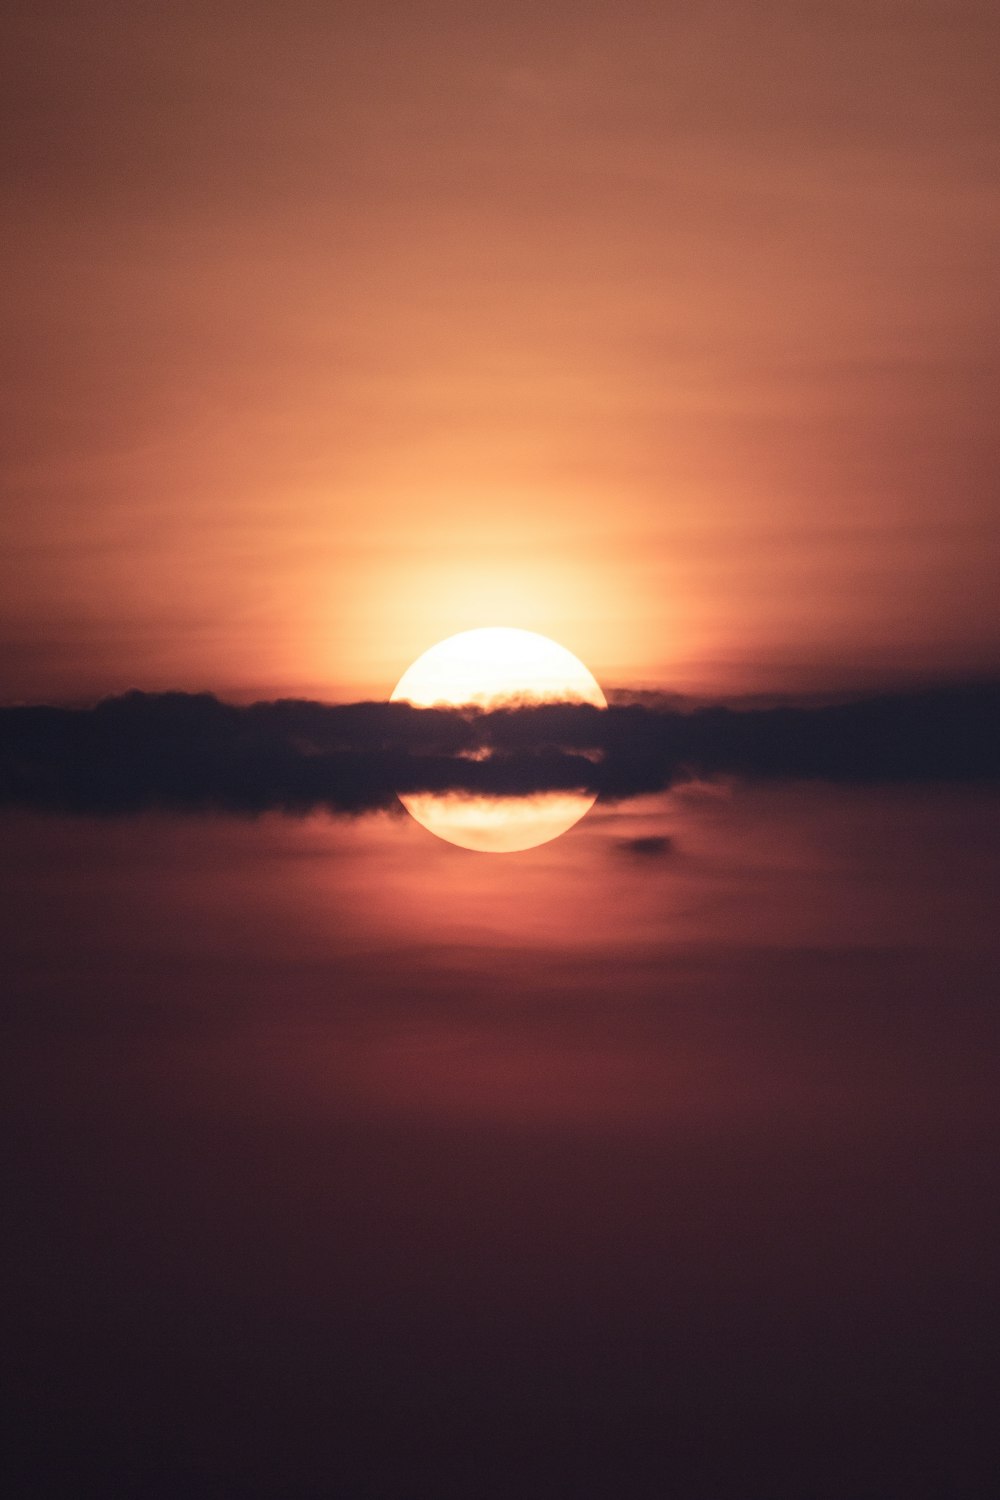 the sun is setting over the horizon of a body of water